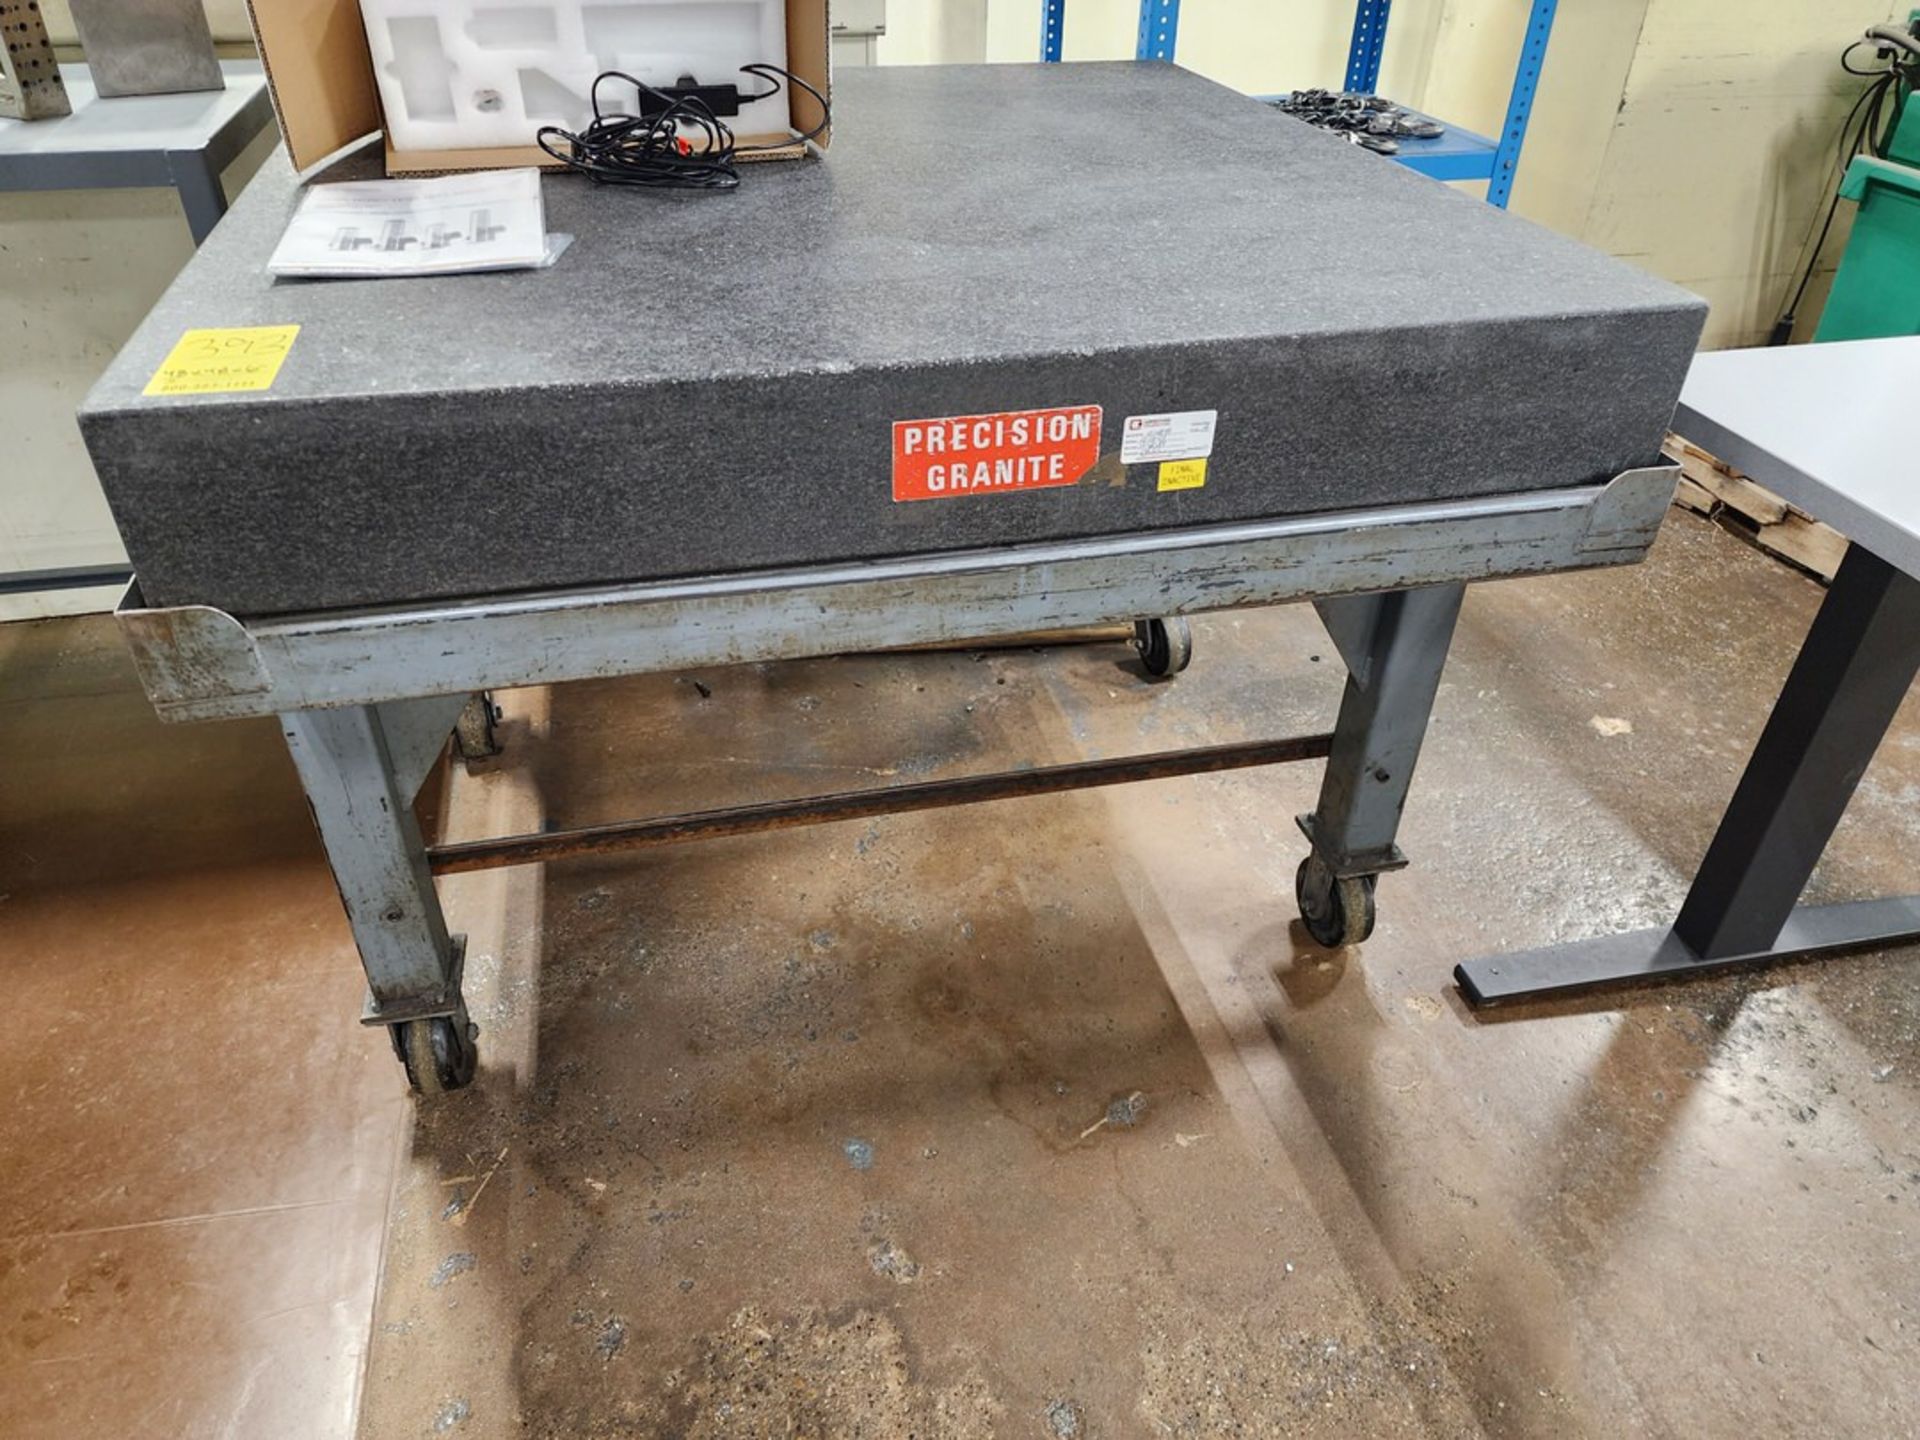 Surface Granite Plate W/ Stand 48' x 48" x 6"